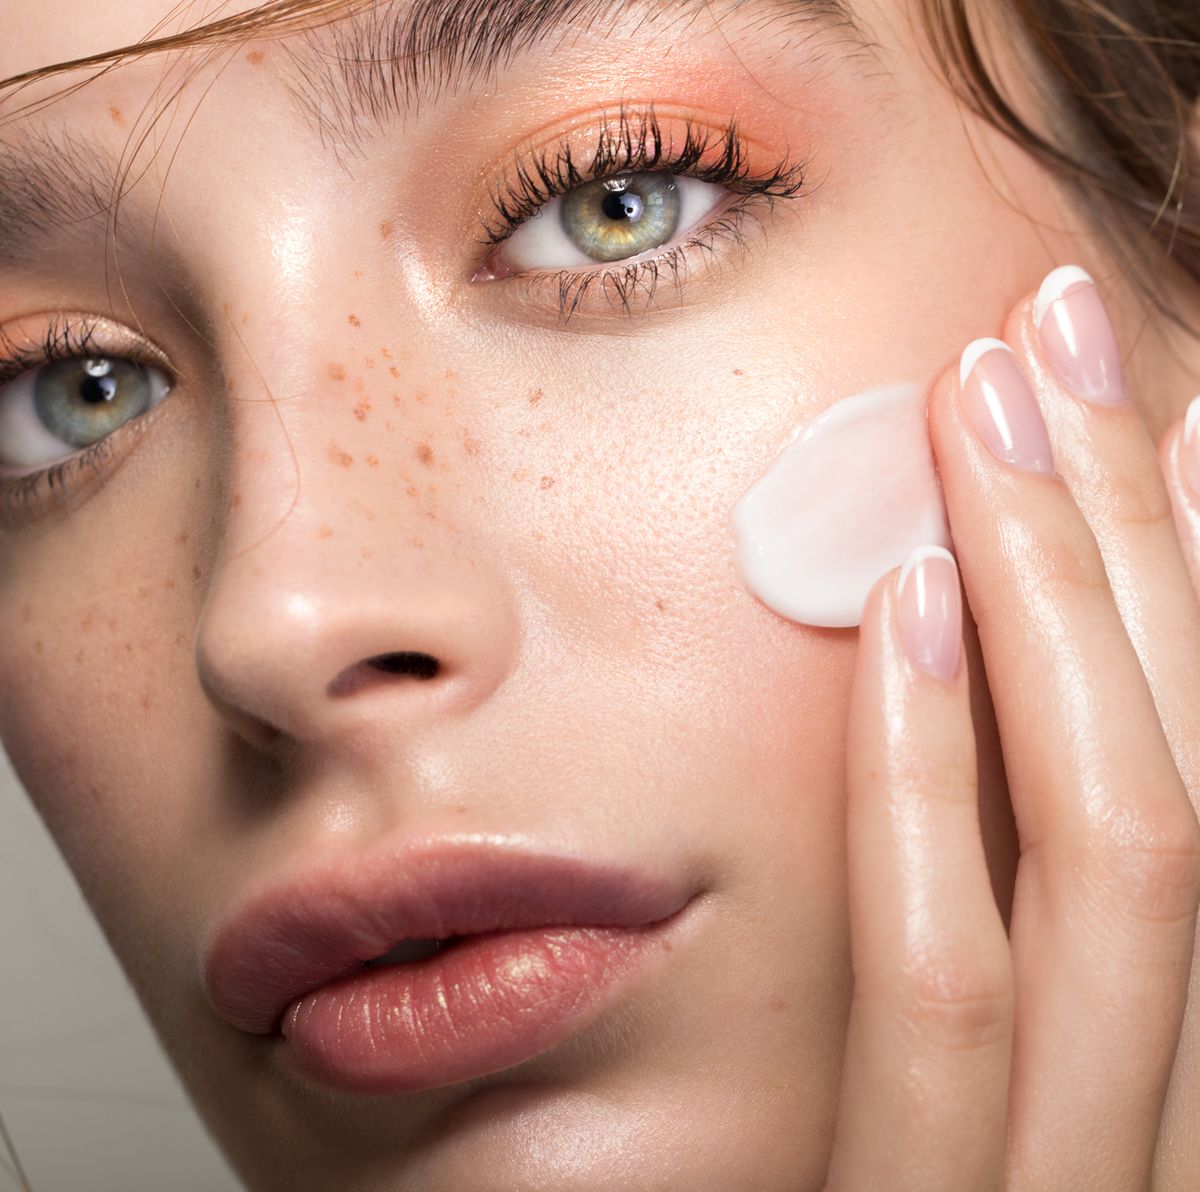 Should You Wash Your Face With Cold or Hot Water? We Asked